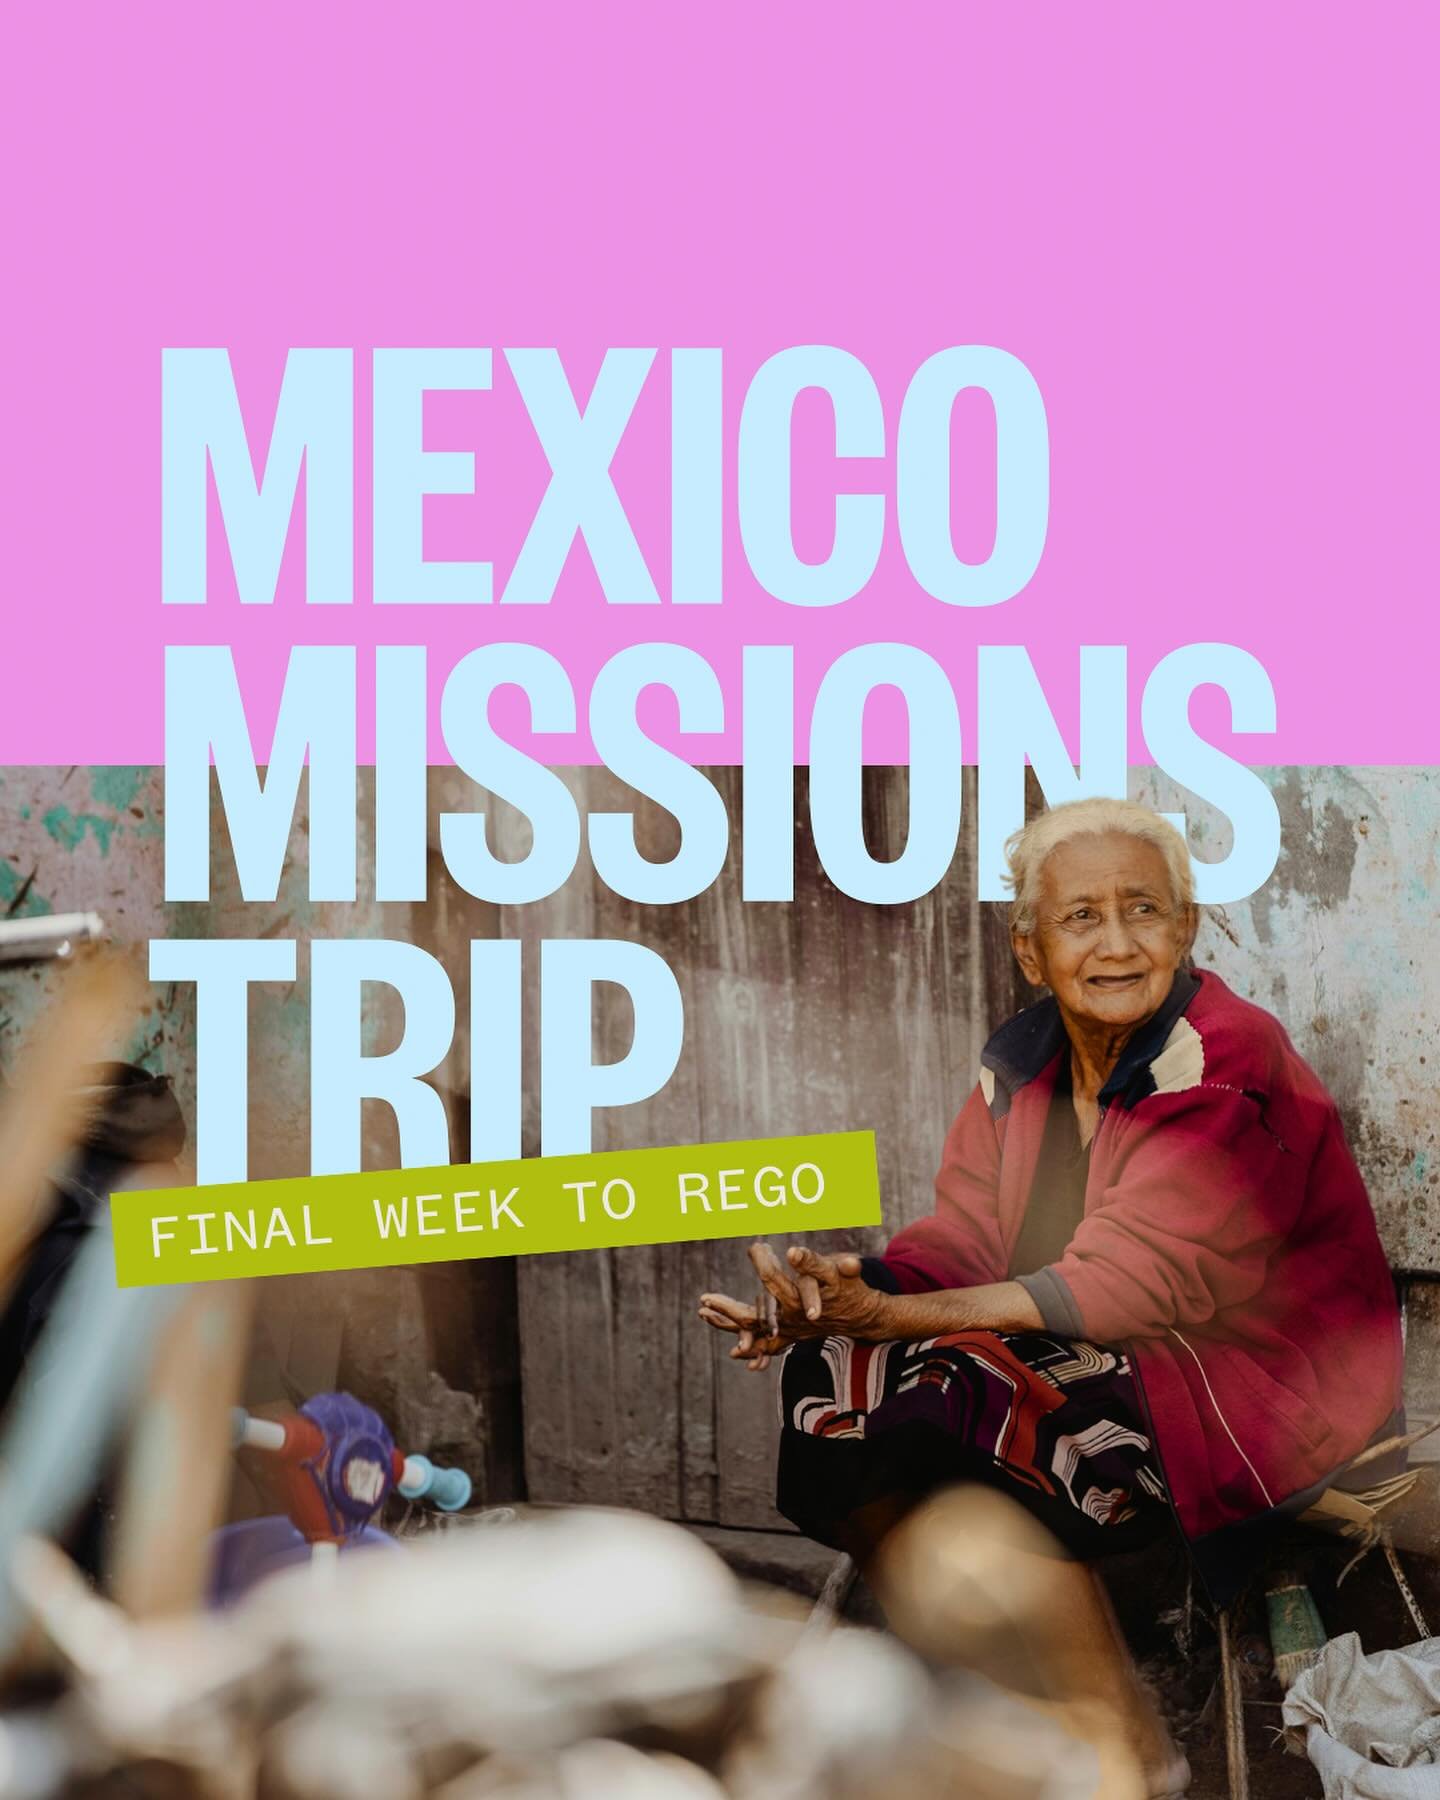 It&rsquo;s the final week to sign up for our missions trip to Mexico (Cerritos/Cabo) with the Robert&rsquo;s Family in August.

Swipe to find out more or head to the Curate Cares page on our website (link in bio)